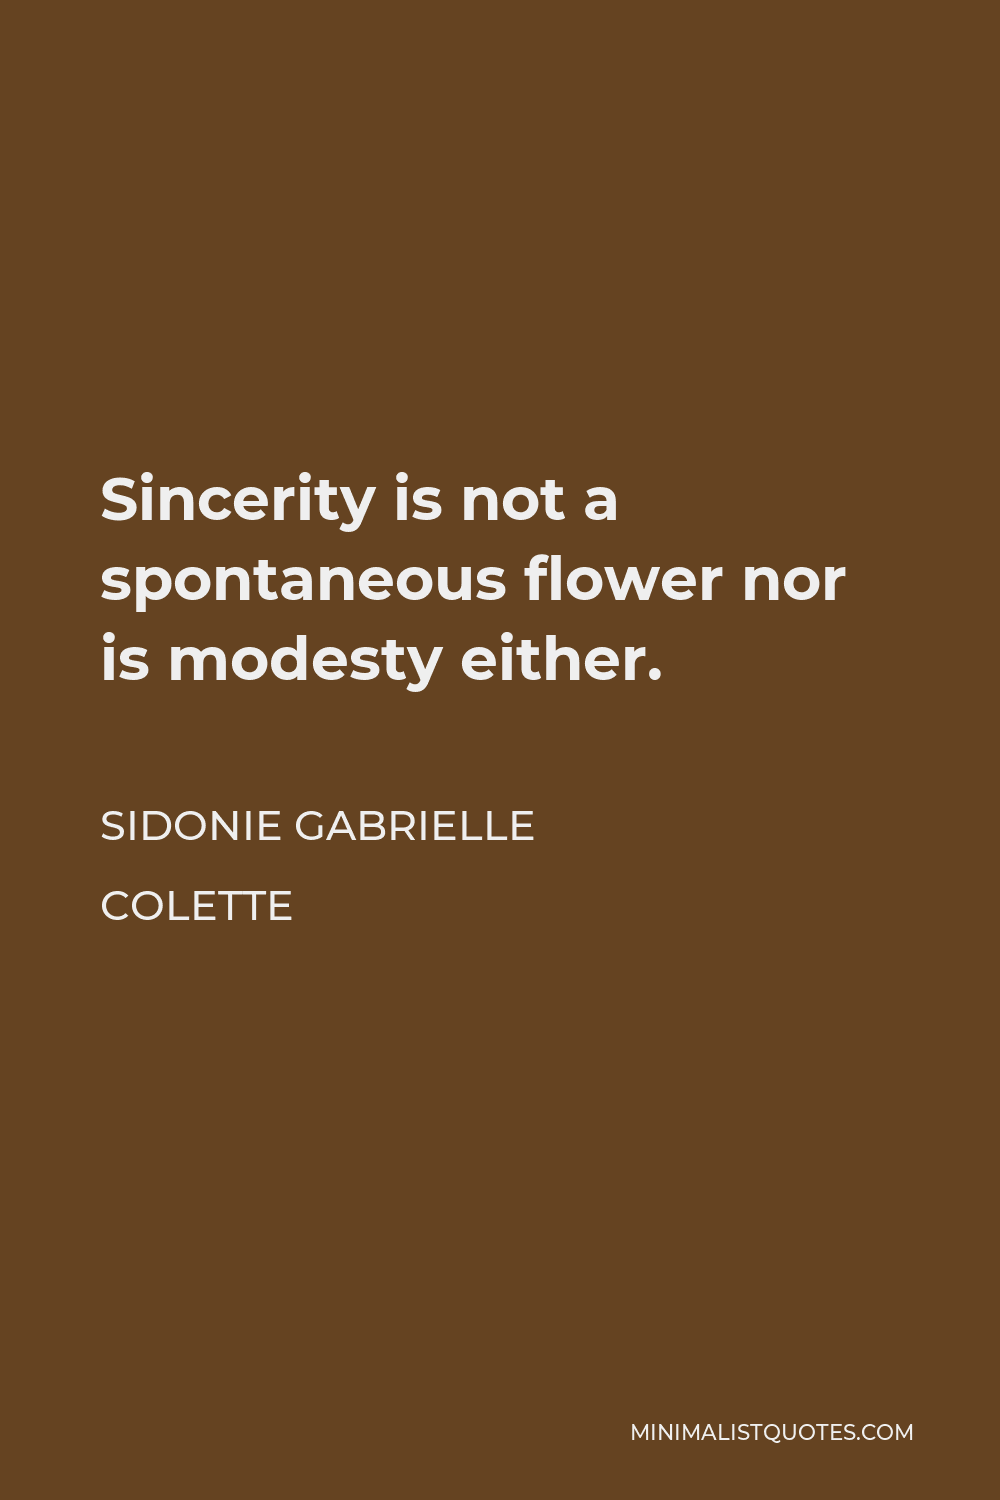 Sidonie Gabrielle Colette Quote - Sincerity is not a spontaneous flower nor is modesty either.